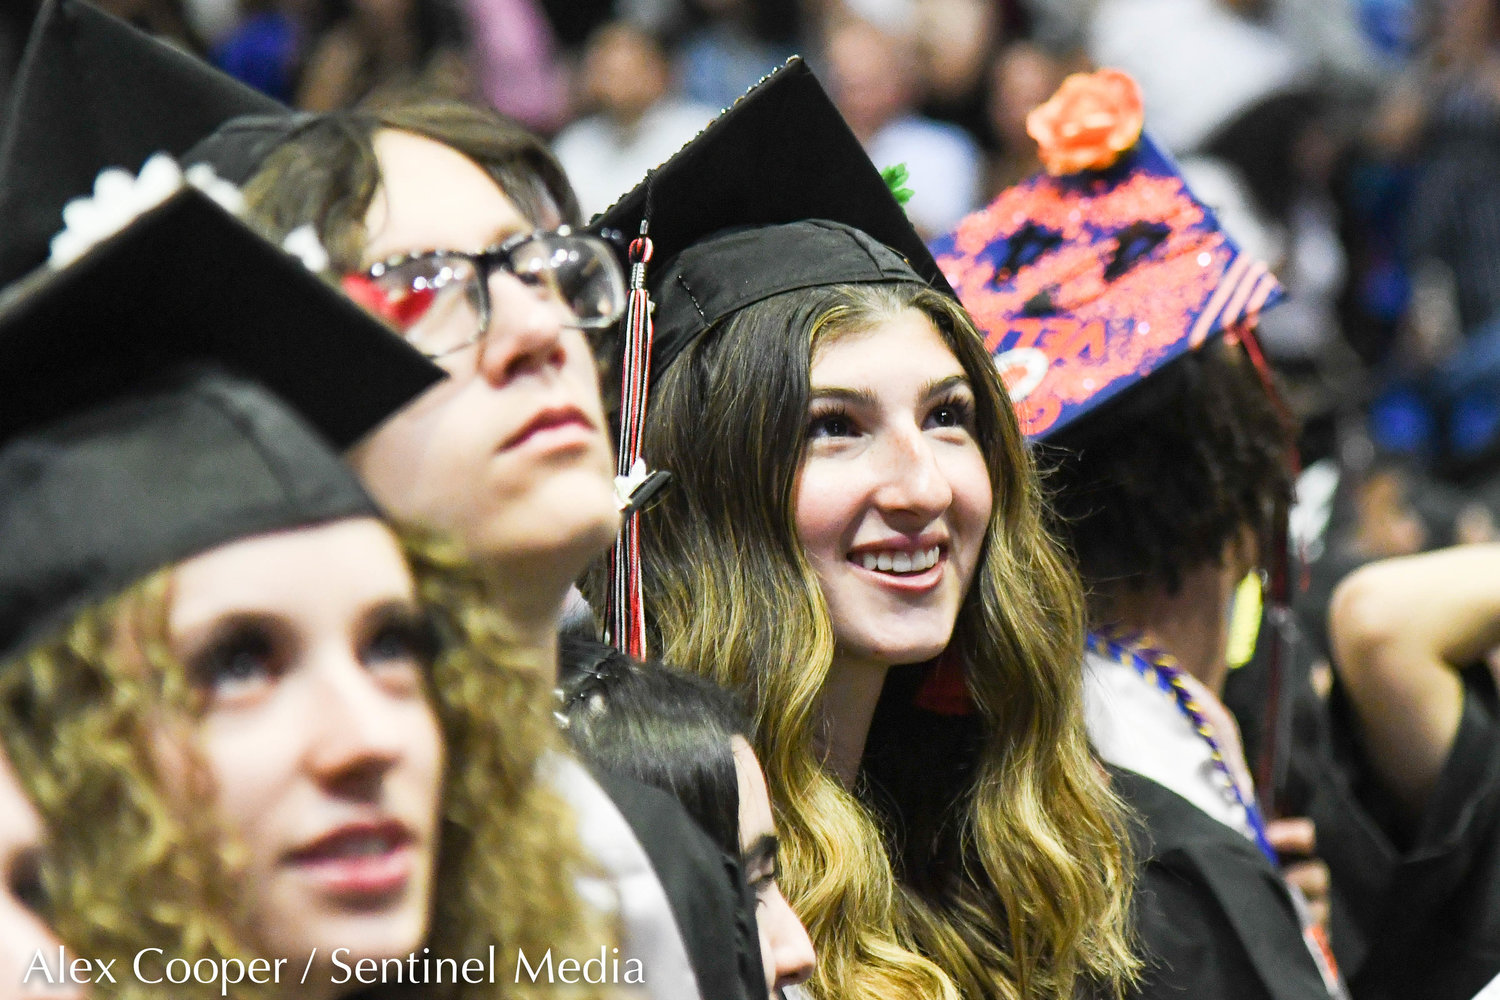 The annual commencement ceremony for Thomas R. Proctor High School graduates took place on Friday at the Adirondack Bank Center at the Utica Memorial Auditorium.